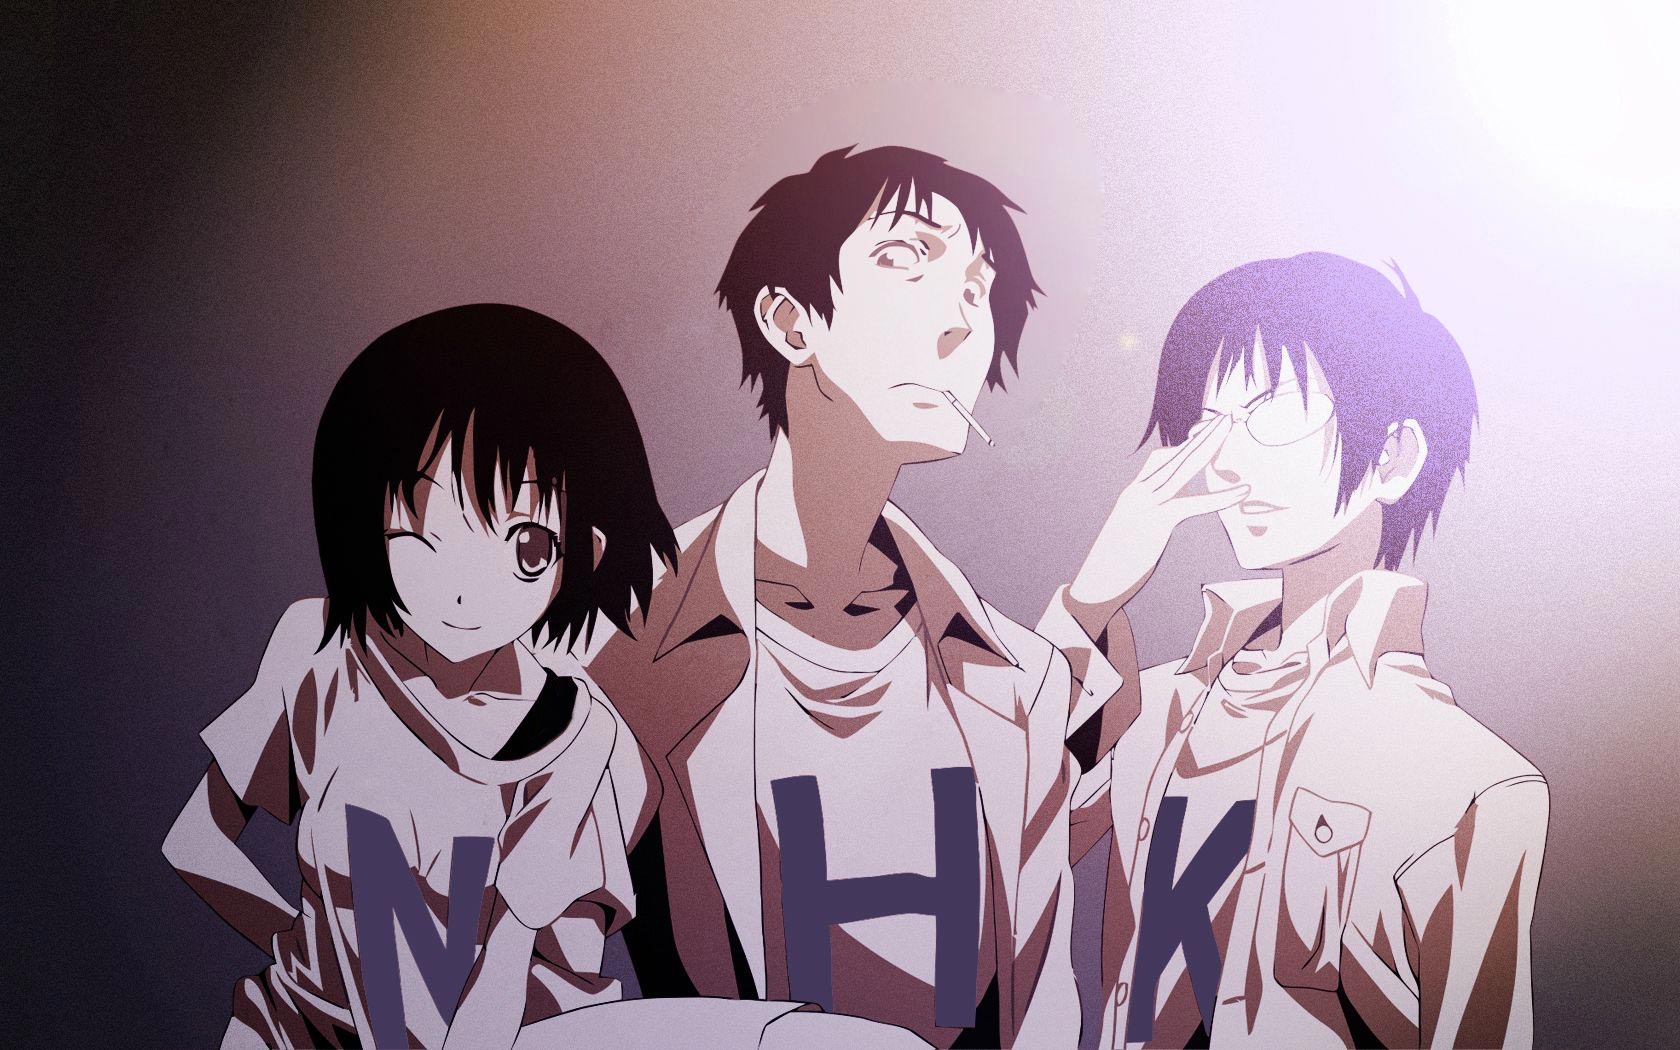 Three welcome anime characters with initials on their shirts